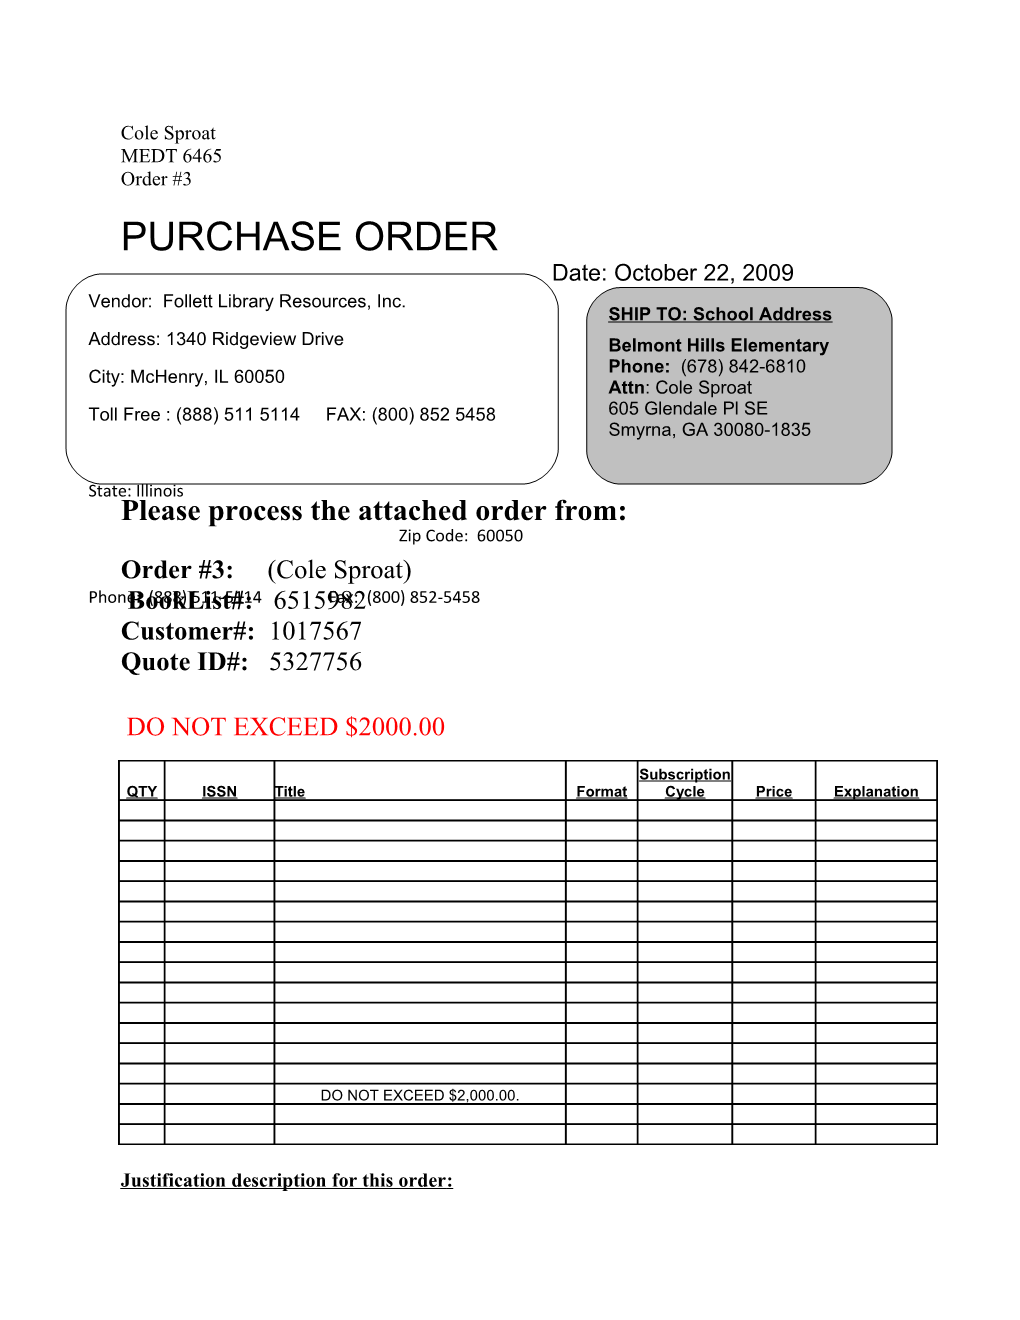 Please Process the Attached Order From